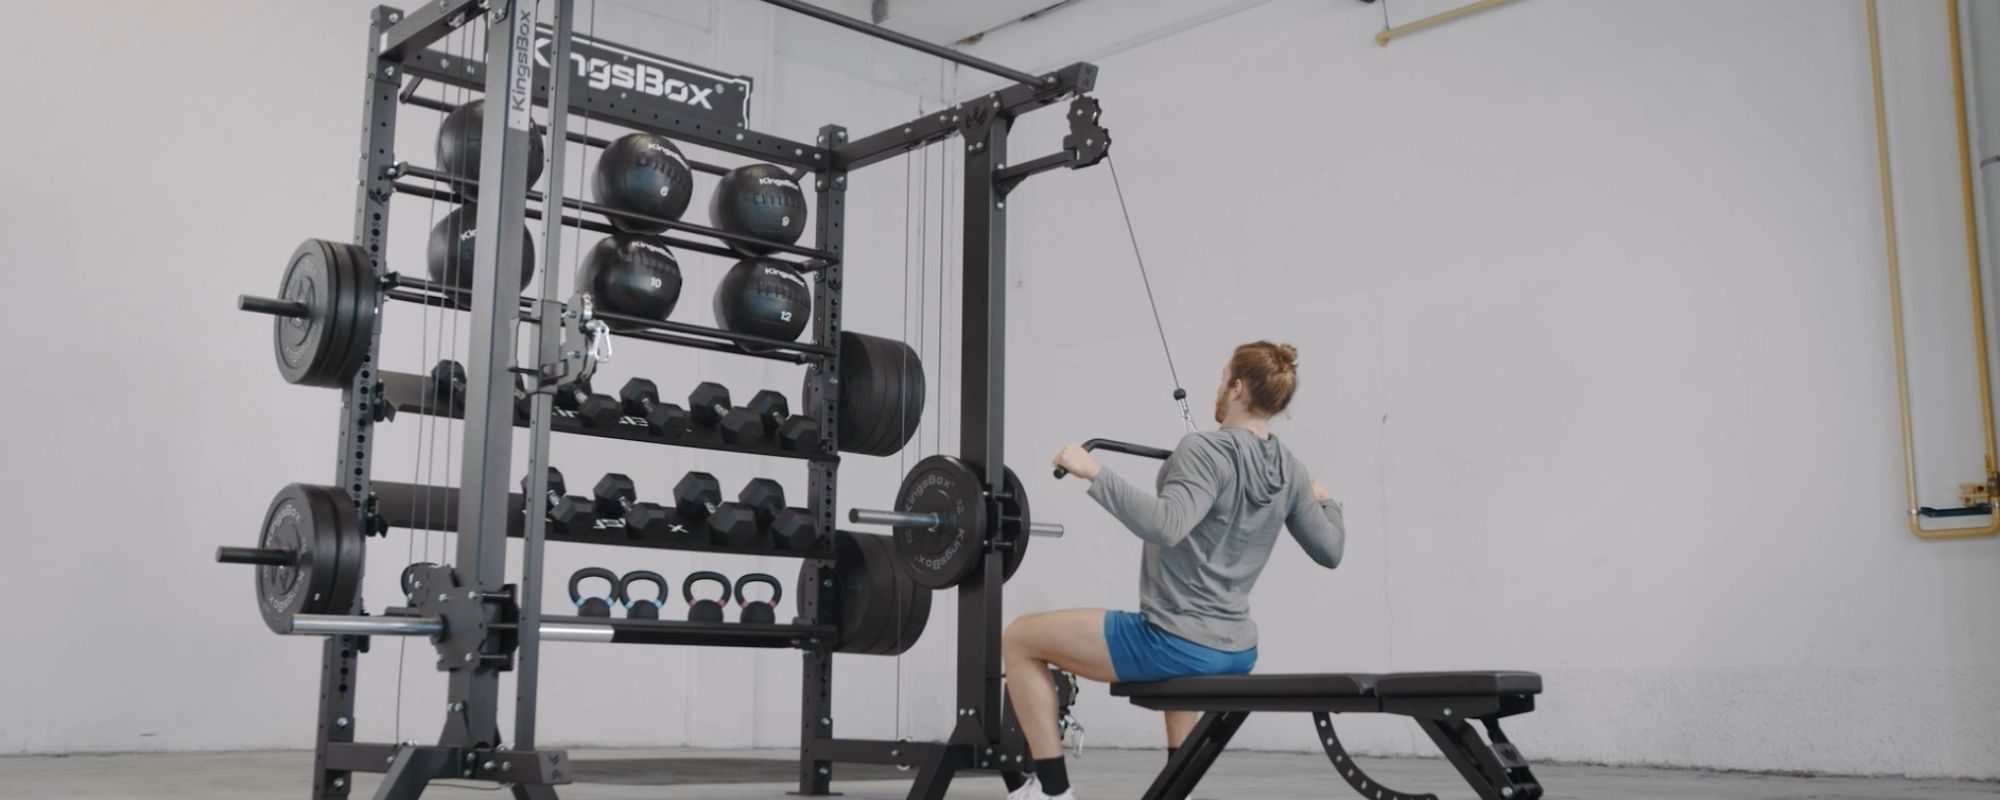 Weightlifting : Quality Gifts with KingsBox equipment